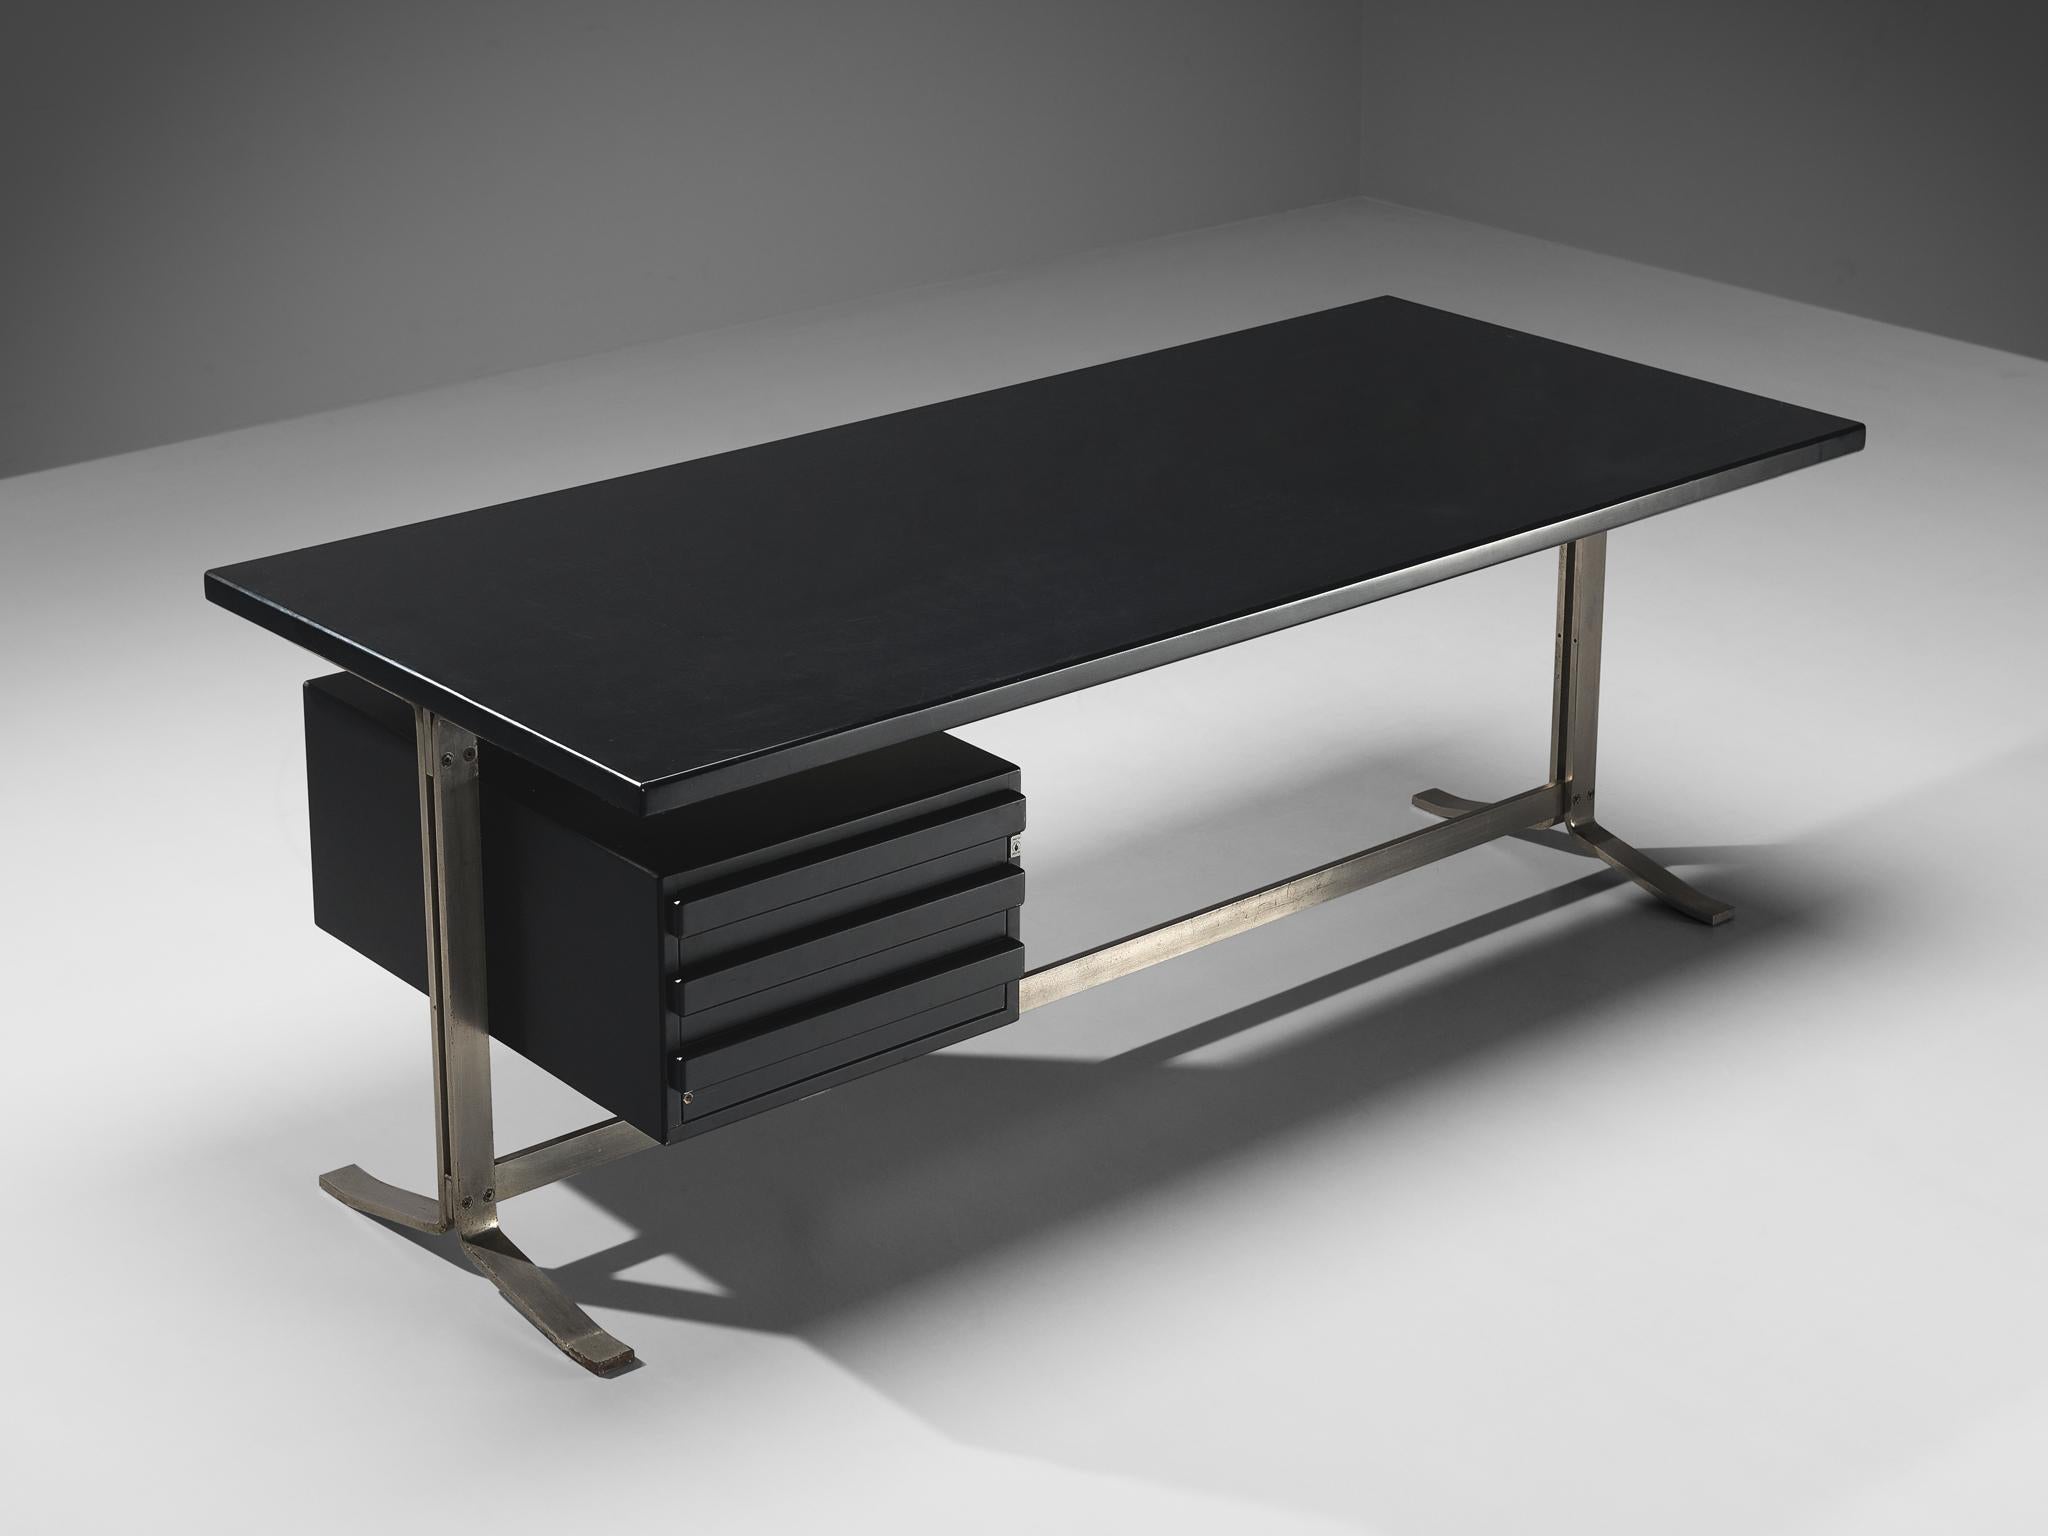 Gianni Moscatelli for Formanova, desk, black lacquered wood, nickel-plated steel, Italy, 1960s

This modern, streamlined writing desk is designed by Gianni Moscatelli in the sixties. Its notable feature is a spacious tabletop, firmly affixed to a